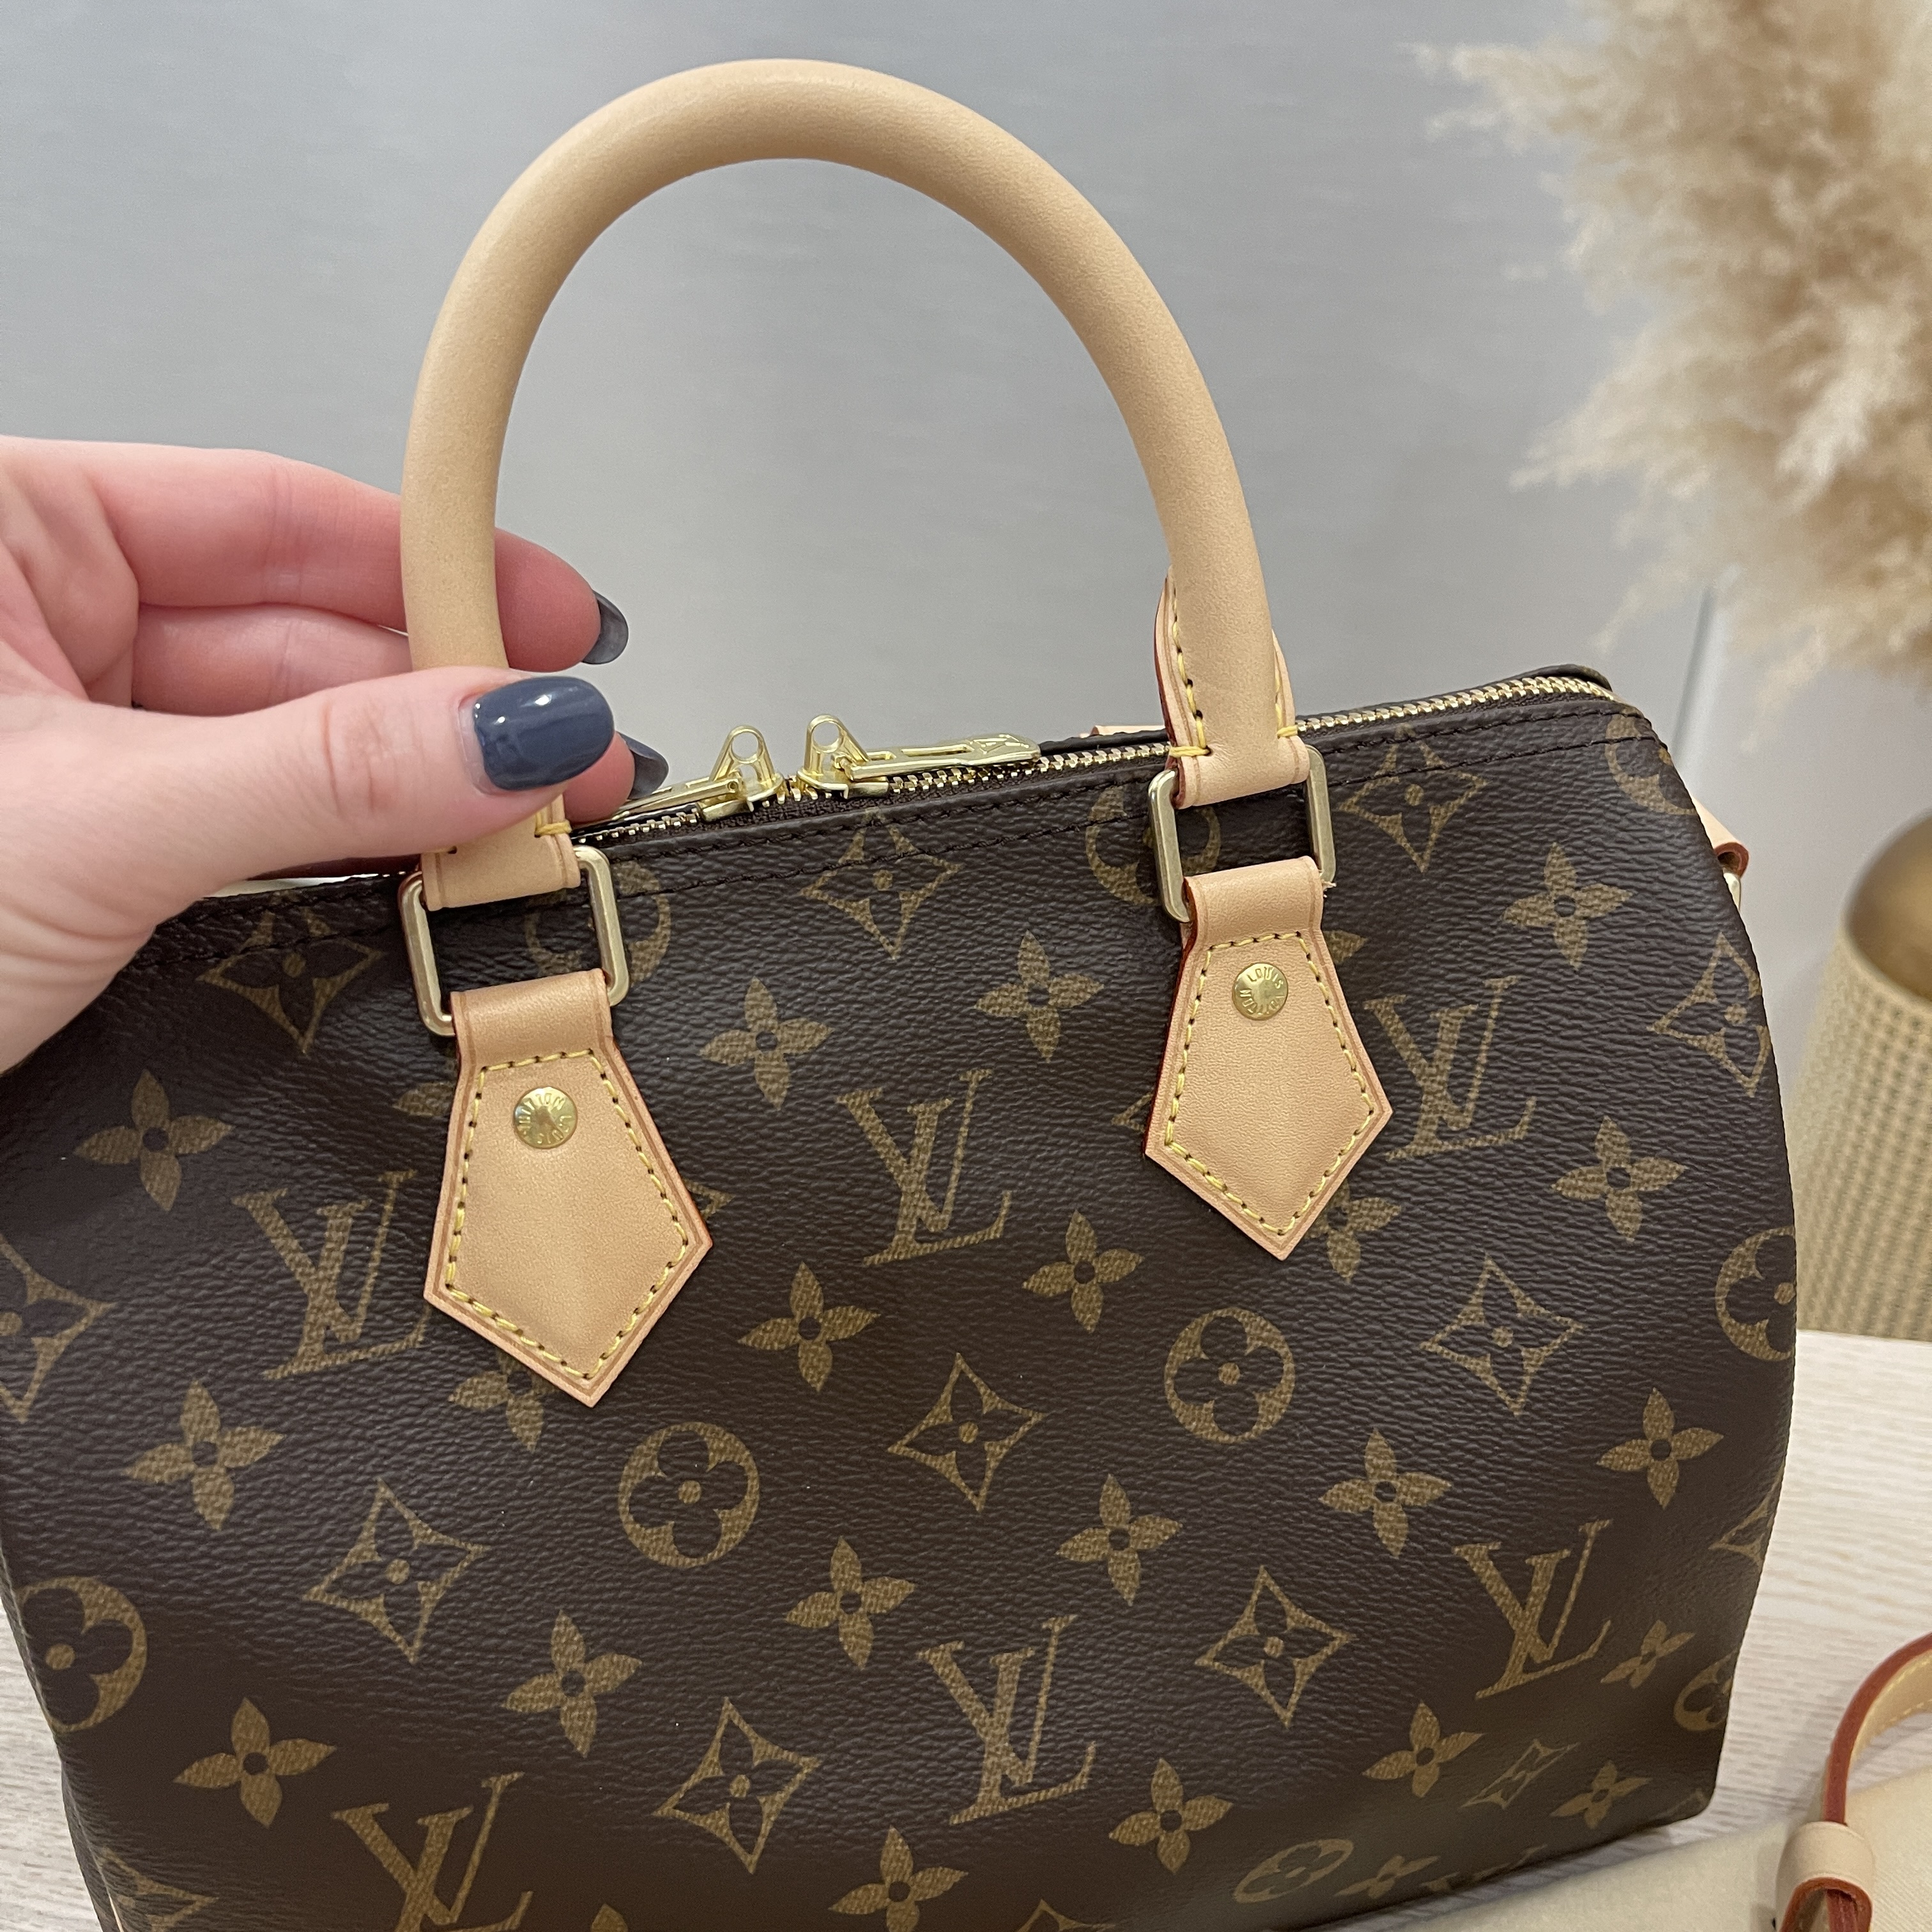 Some day Louis Vuitton Speedy 25 Bandouliere.  .com/eng-us/products/speedy-bandouliere-25-monogram-008…